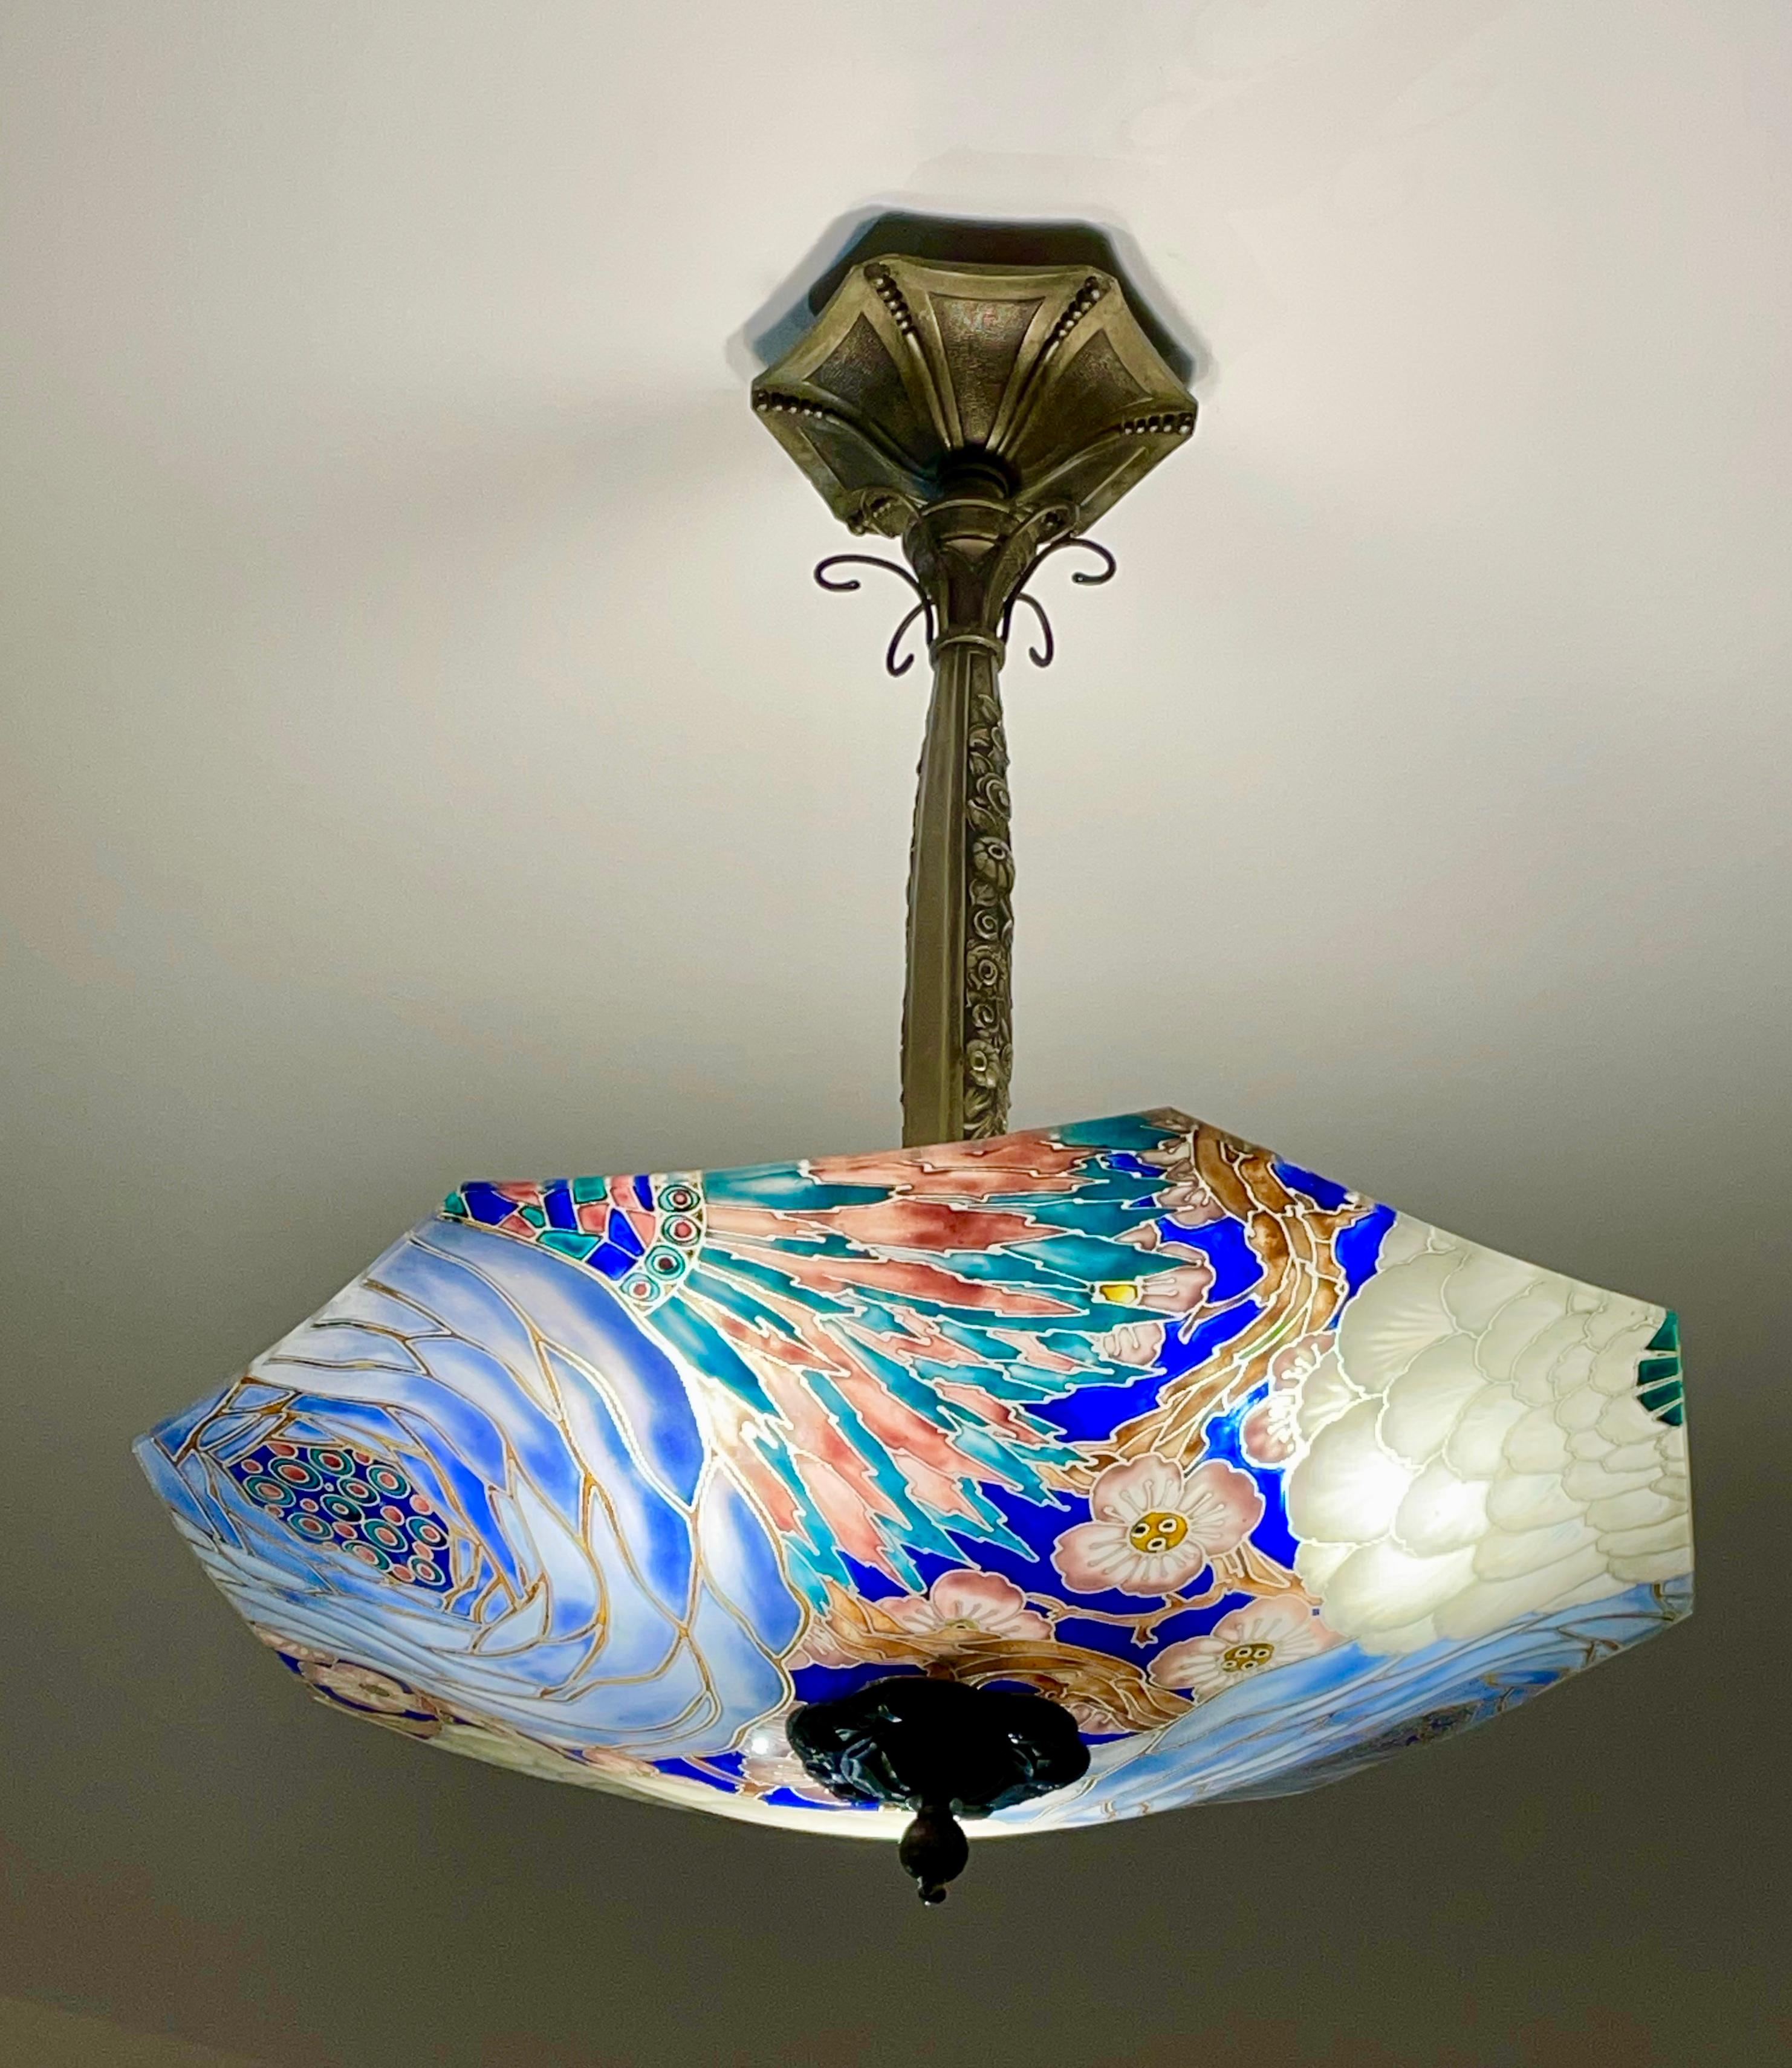 French Art Deco pendant light by Loys Lucha, Paris, France, 1930s. 
This stunningly beautiful glass shade is suspended from the ceiling by a decorative bronze fitting.
The length of the bronze suspension is decorated with flowers and leaves.
The